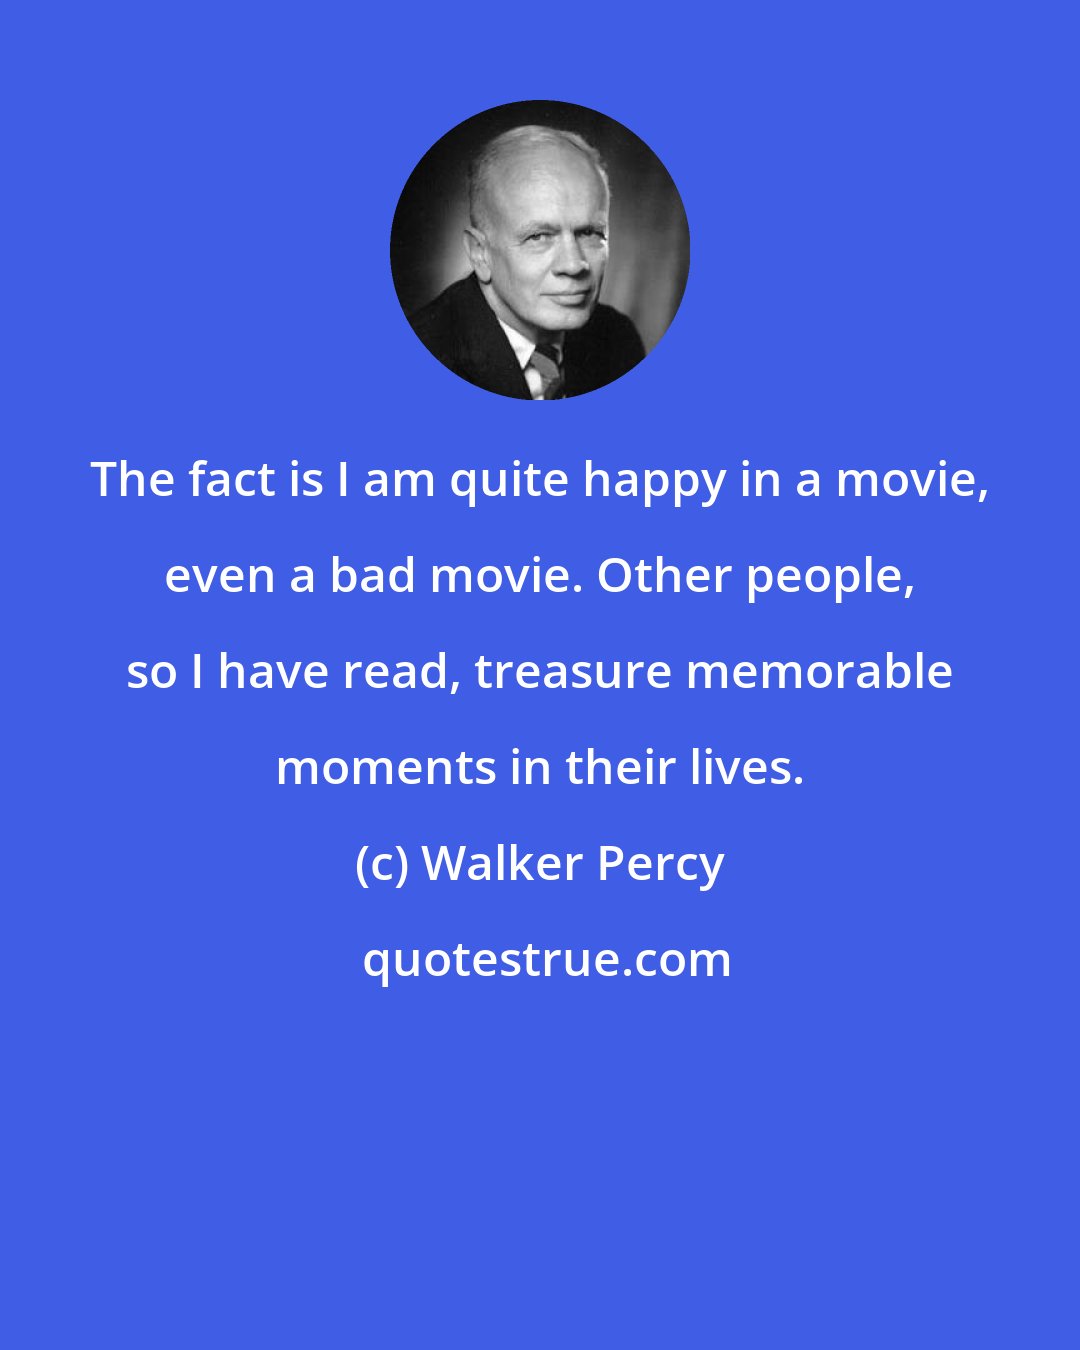 Walker Percy: The fact is I am quite happy in a movie, even a bad movie. Other people, so I have read, treasure memorable moments in their lives.